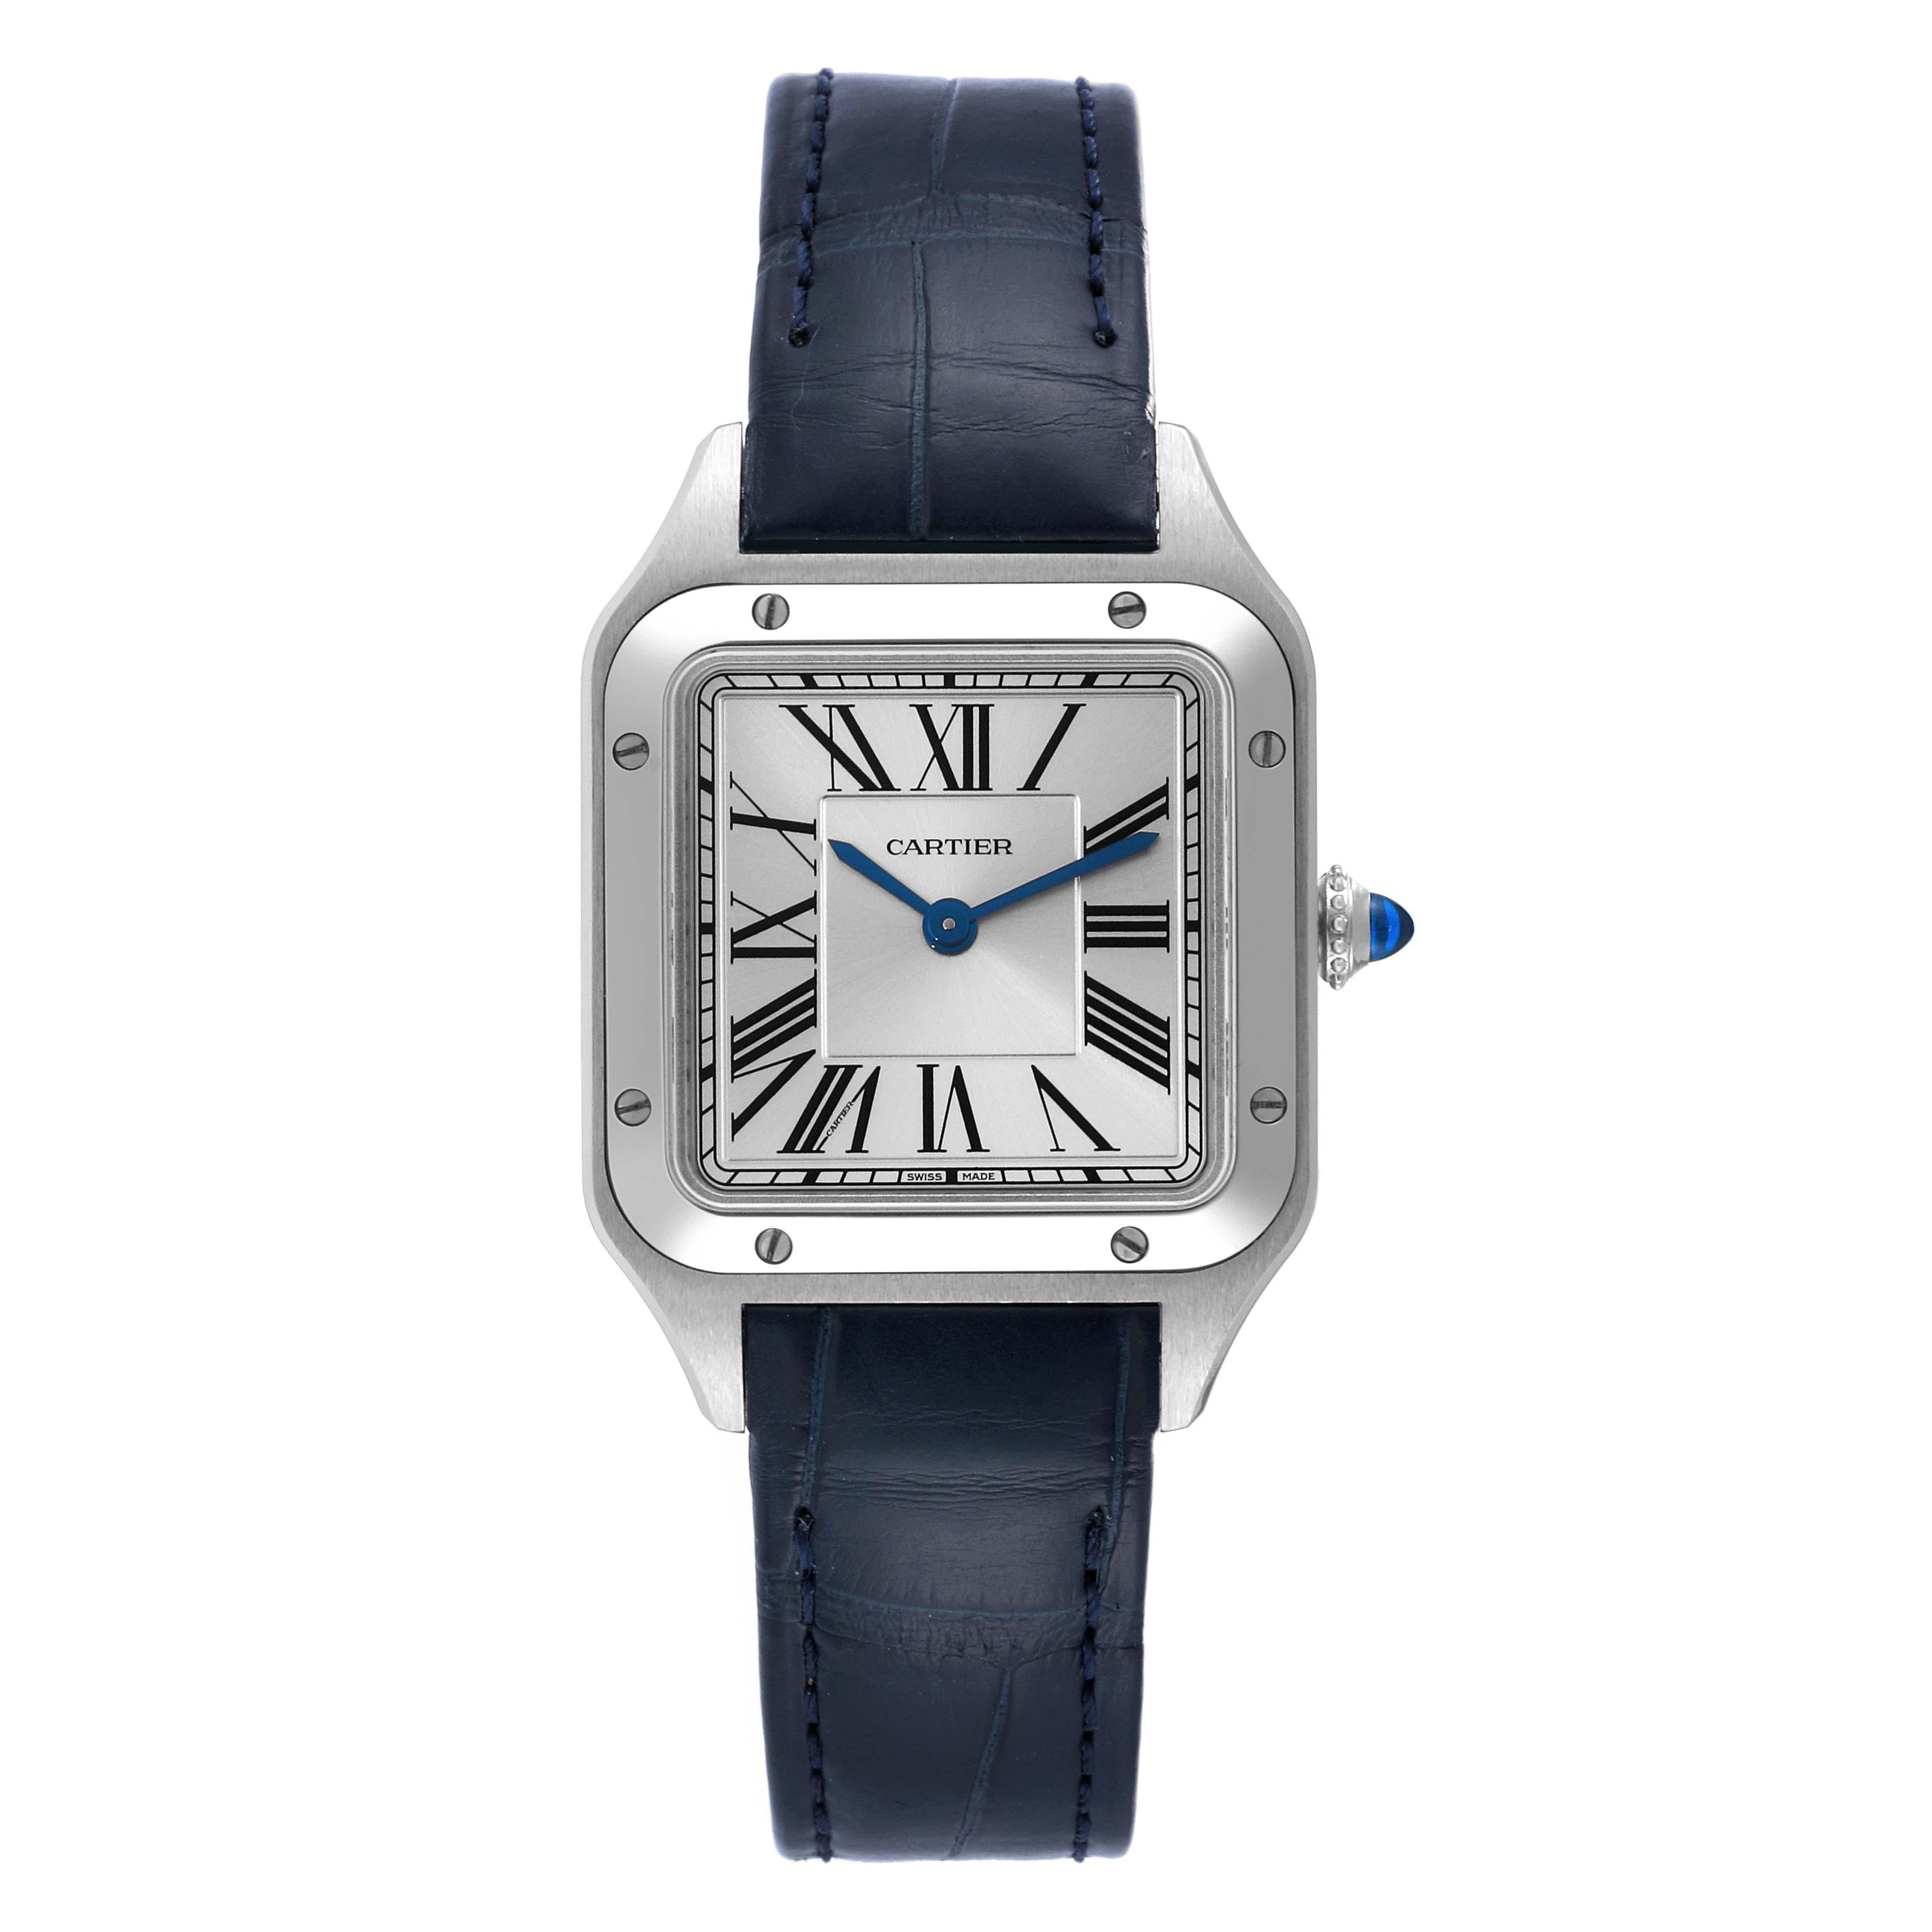 Cartier Santos Dumont Small Steel Ladies Watch WSSA0023 Unworn. Quartz movement. Stainless steel case 38 mm x 27.5 mm. Case thickness 7.3 mm. Circular grained crown set with blue spinel cabochon. Stainless steel bezel punctuated with 8 signature